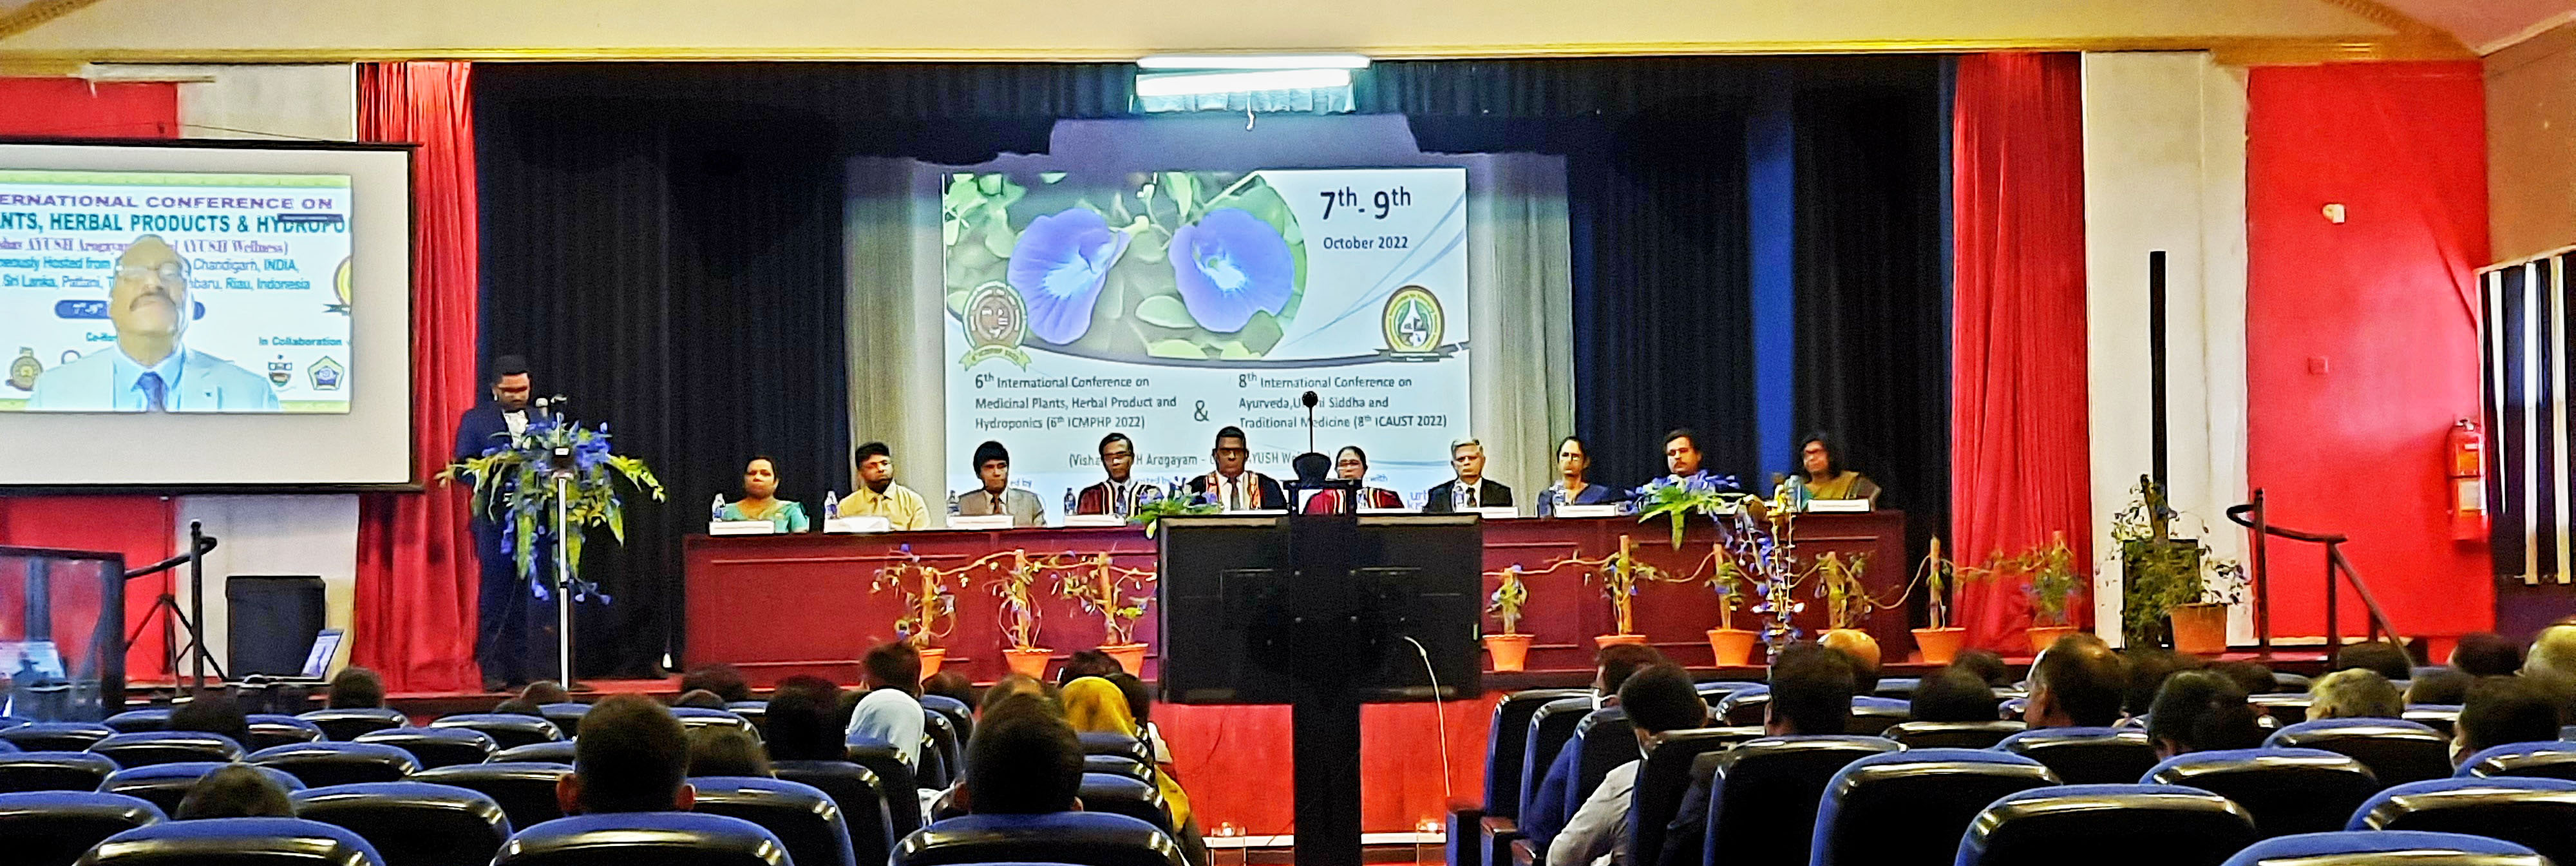 The inauguration ceremony of the  “6th  International Conference on Medicinal Plants, Herbal Products & Hydroponics (ICMPHP6)